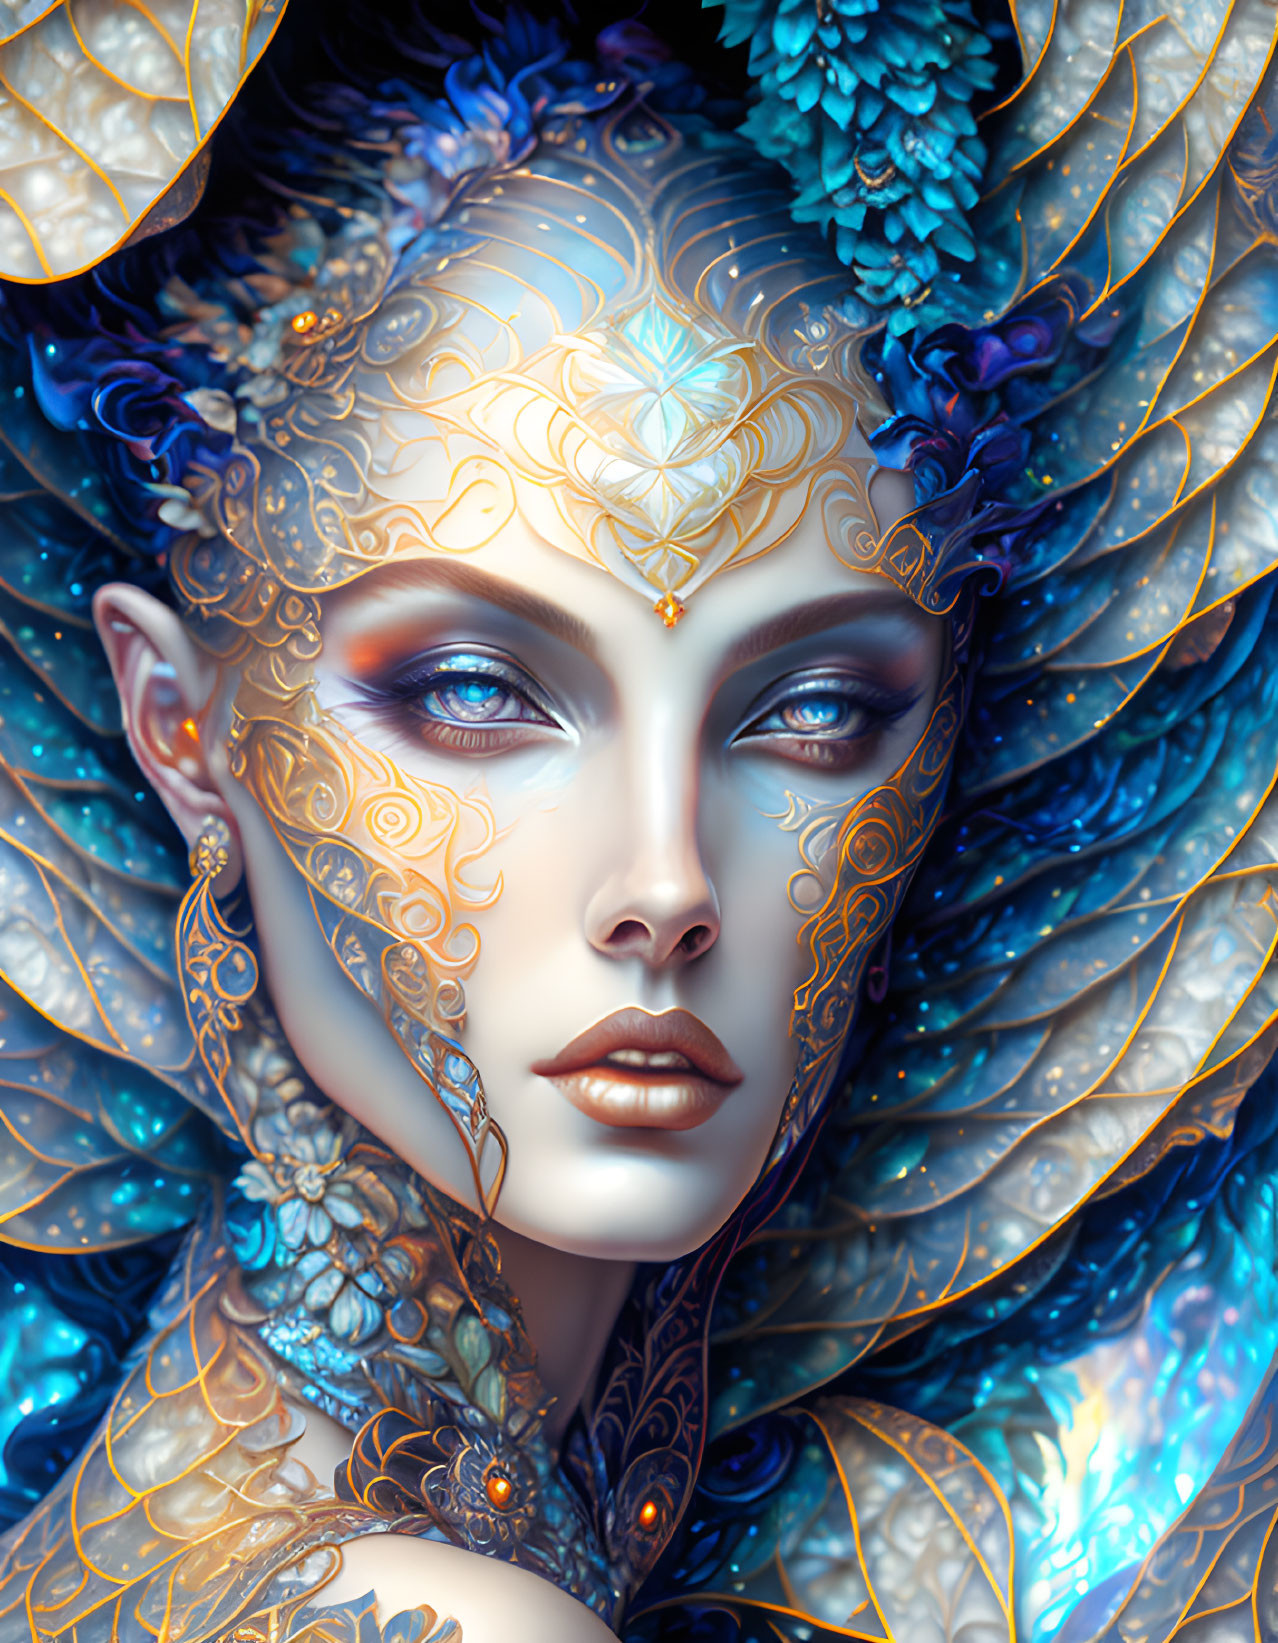 Elaborate gold and blue headpiece on woman with captivating gaze